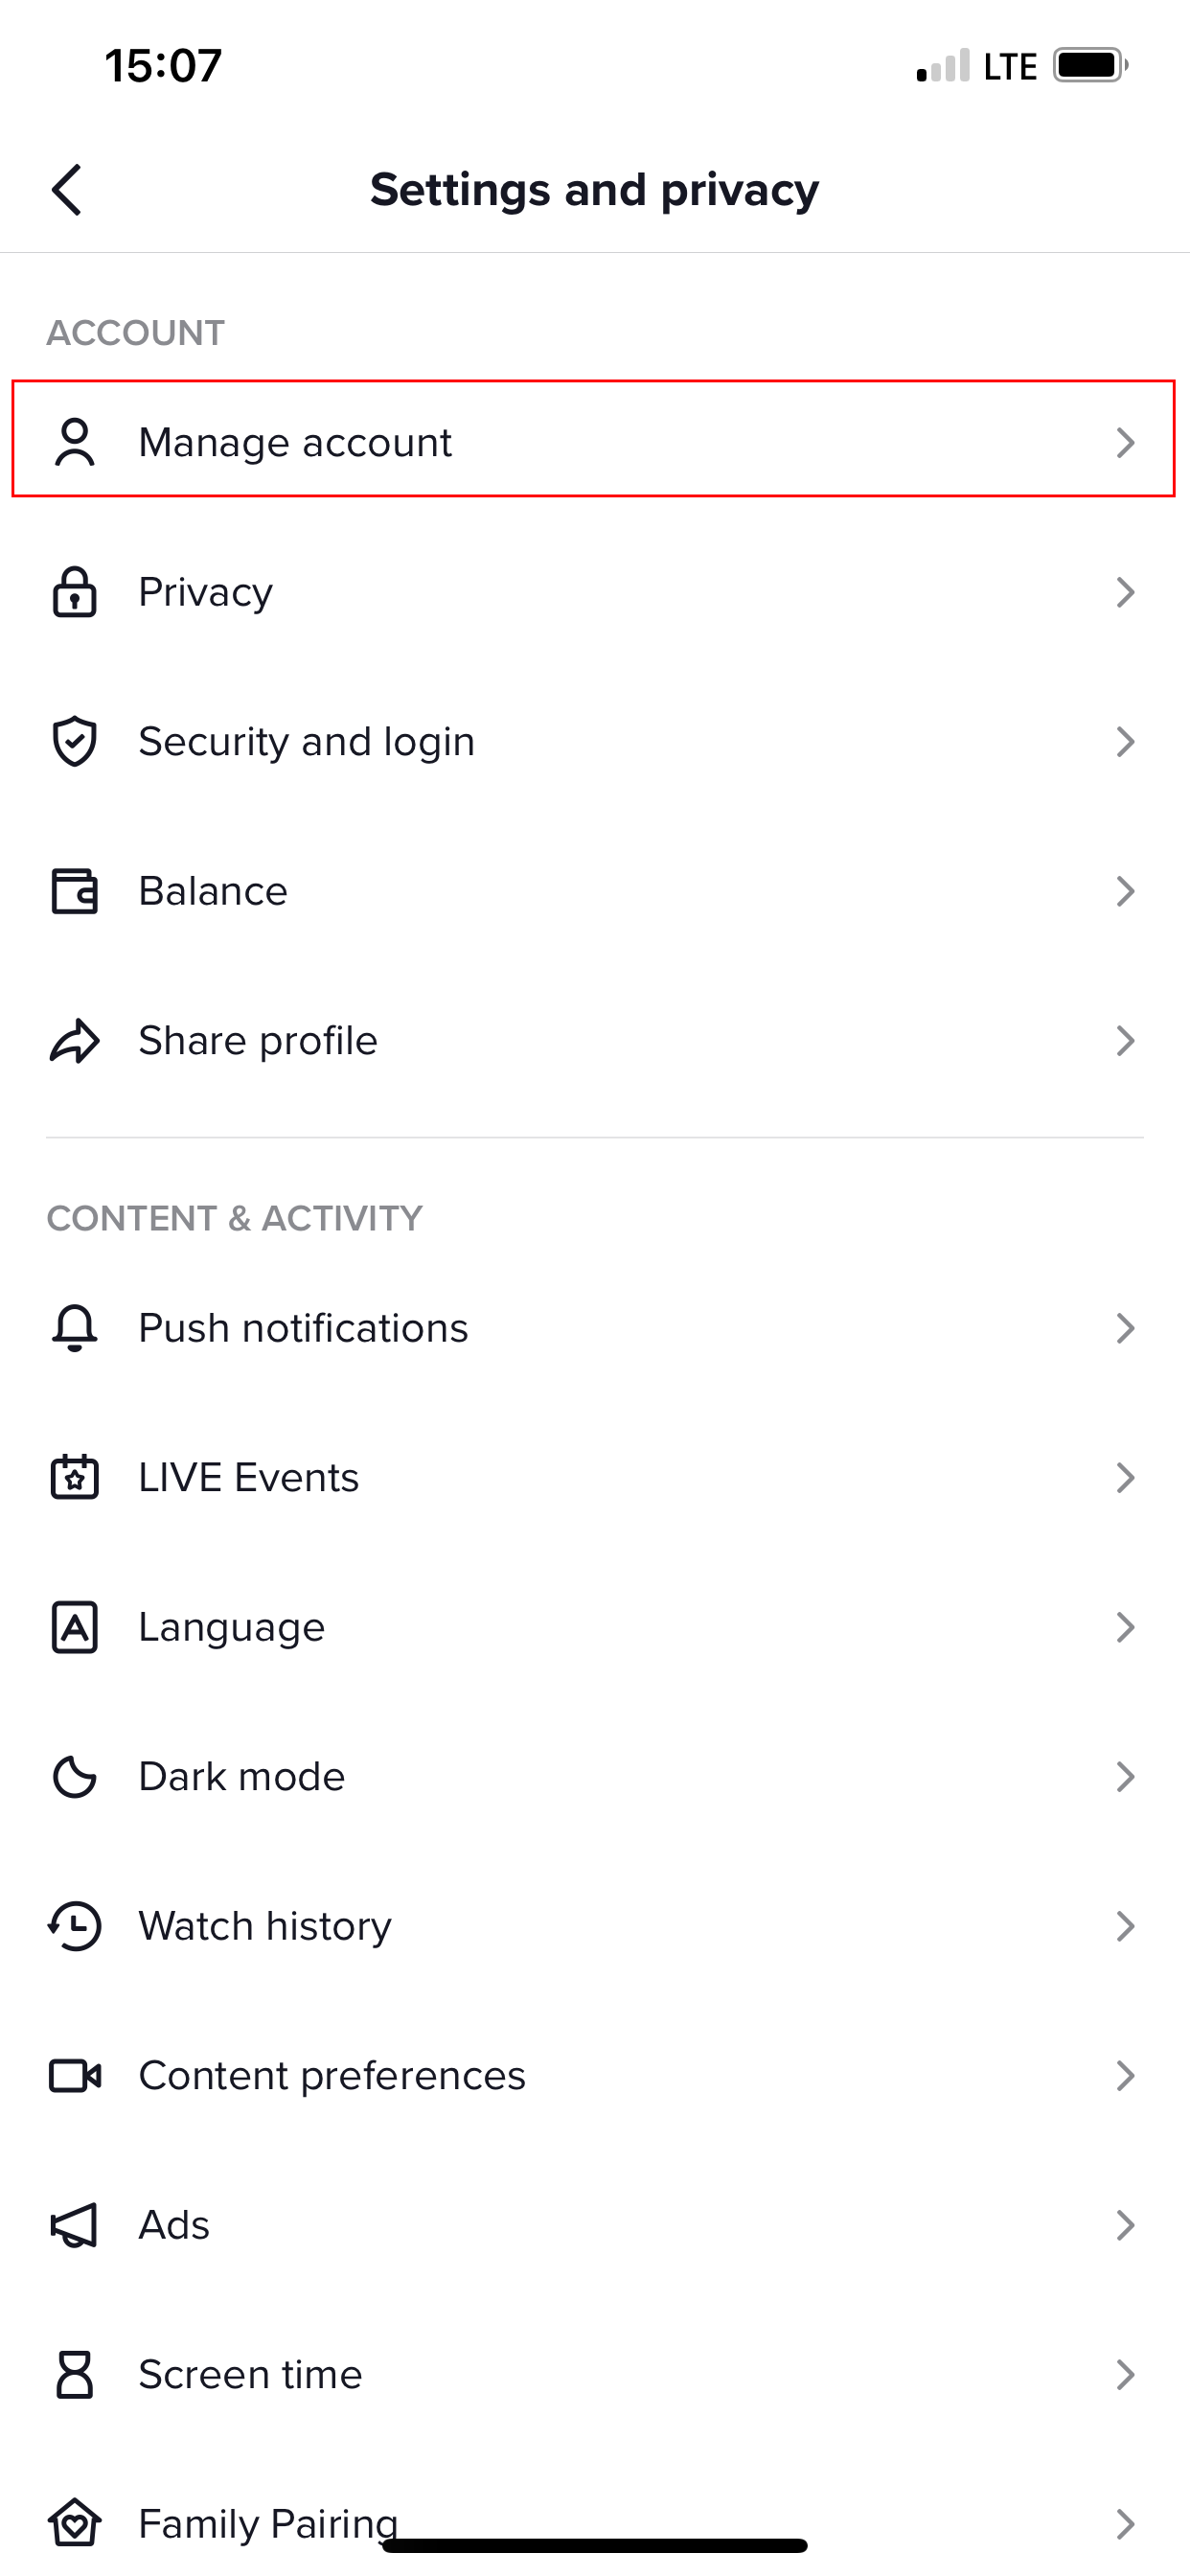 Screenshot-of-tiktok-settings-and-privacy-page-1